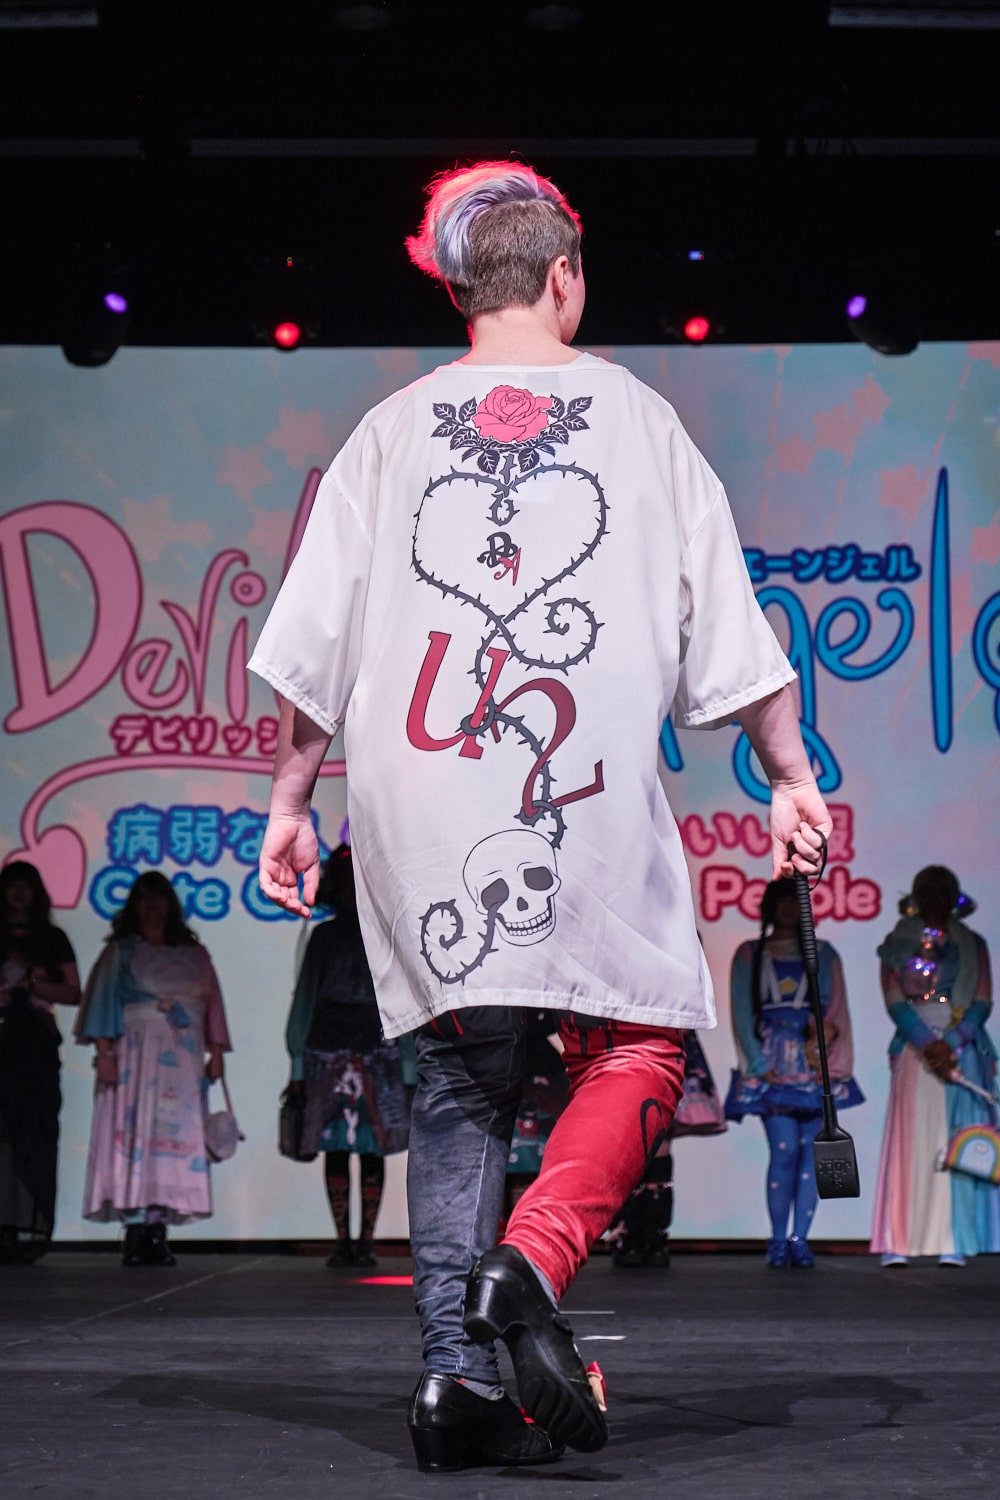 Punk model wearing baggy T-shirt with anime styled couple with bloody print leggings - full body backside. Back of shirt has thorn vine in the shape of a heart and the phrase "U2".